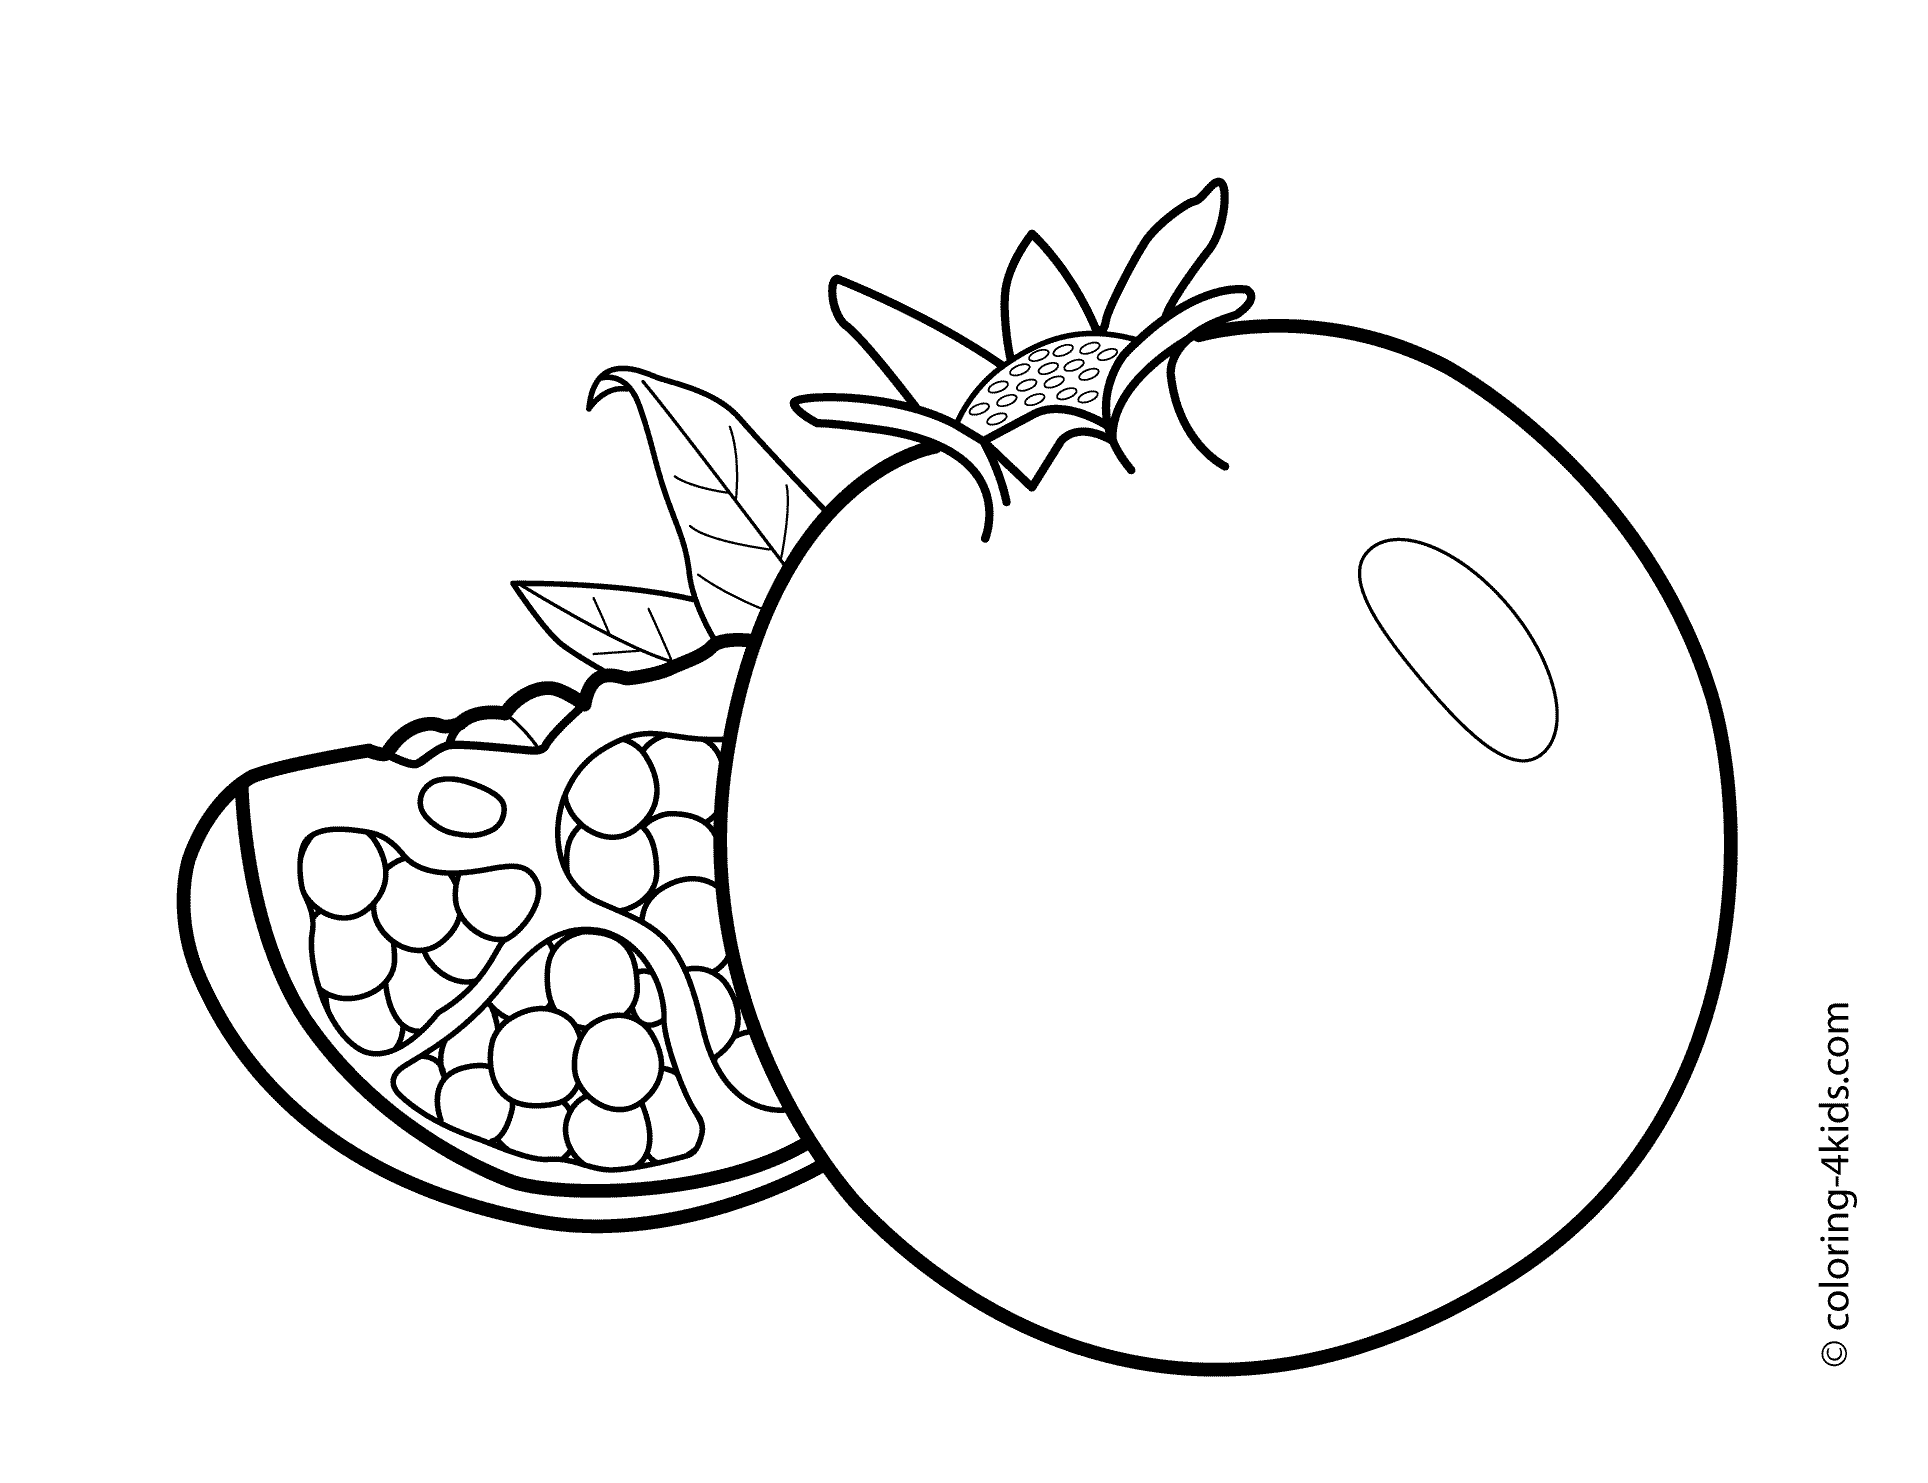 Pomegranate fruits coloring pages for kids printable free fruit coloring pages vegetable coloring pages free coloring pages